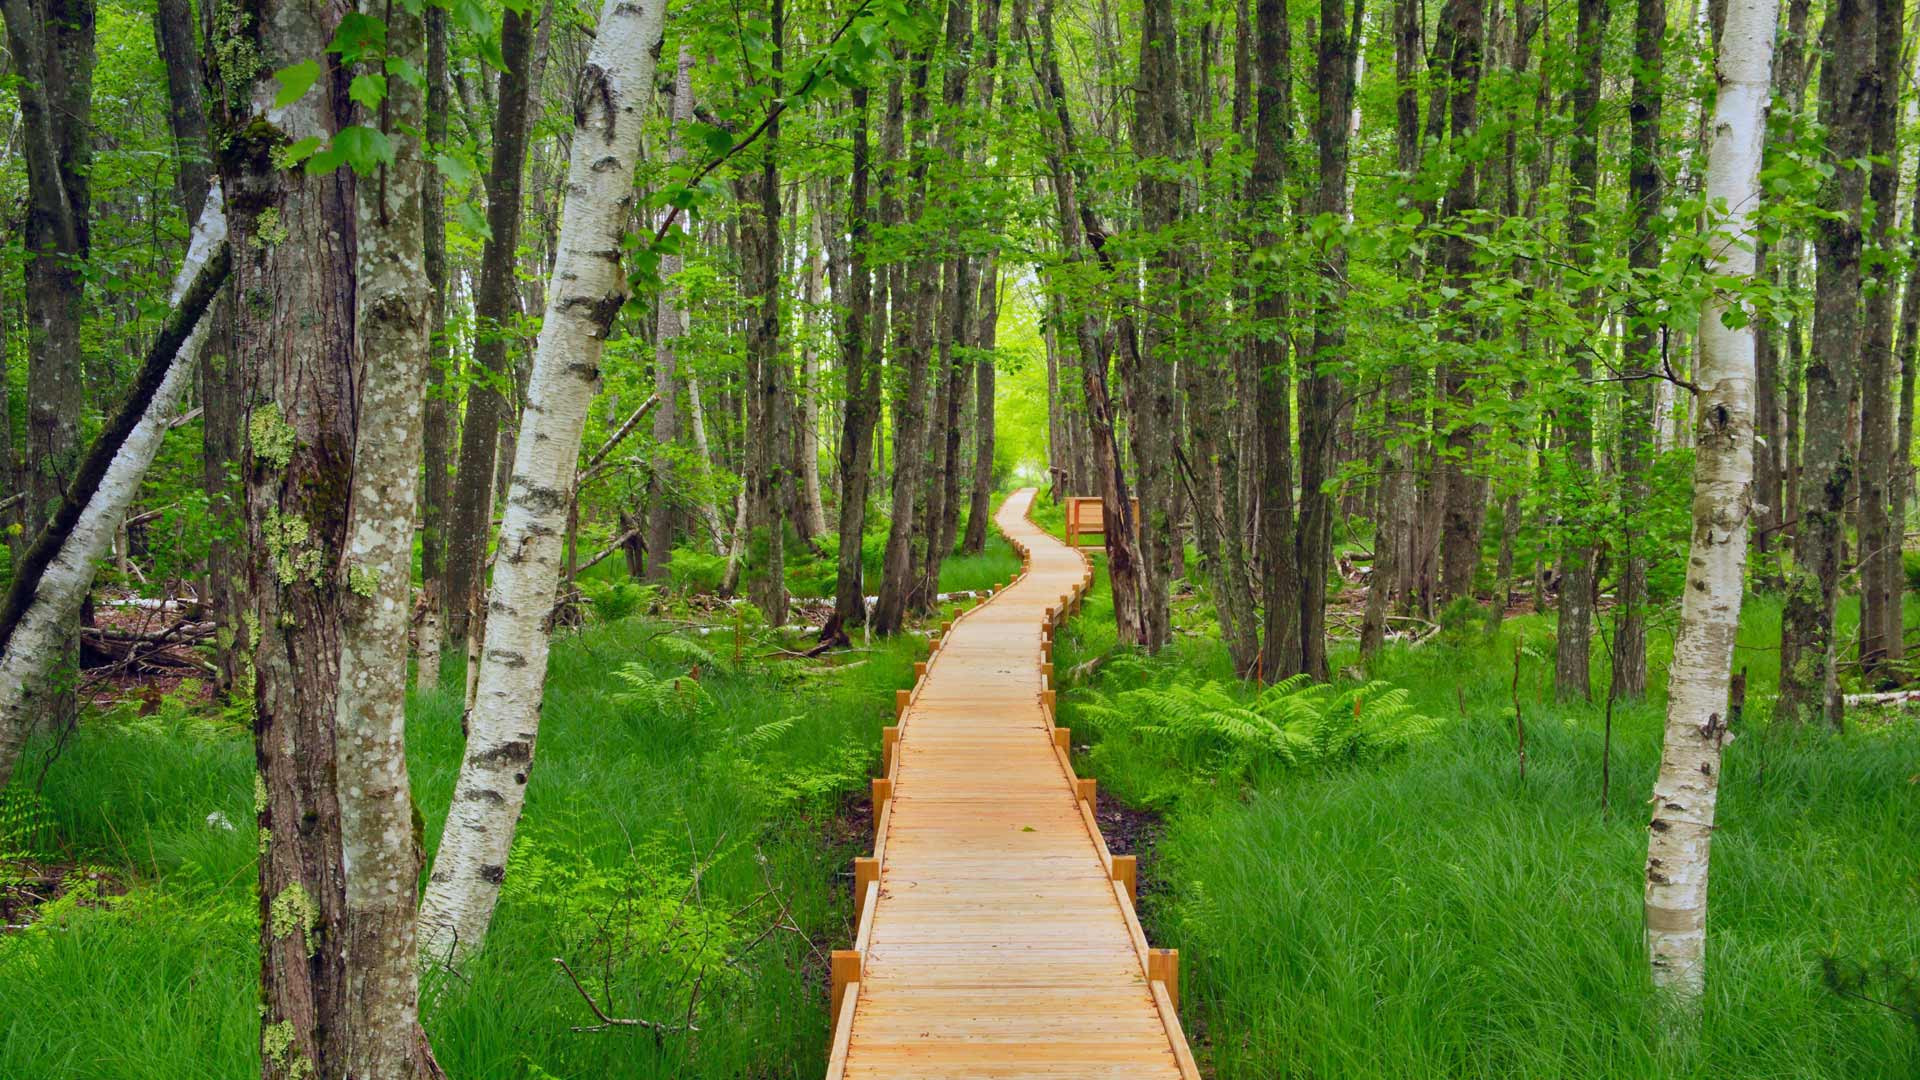 The Board walk through Wetland by Peter Atkins and Associates